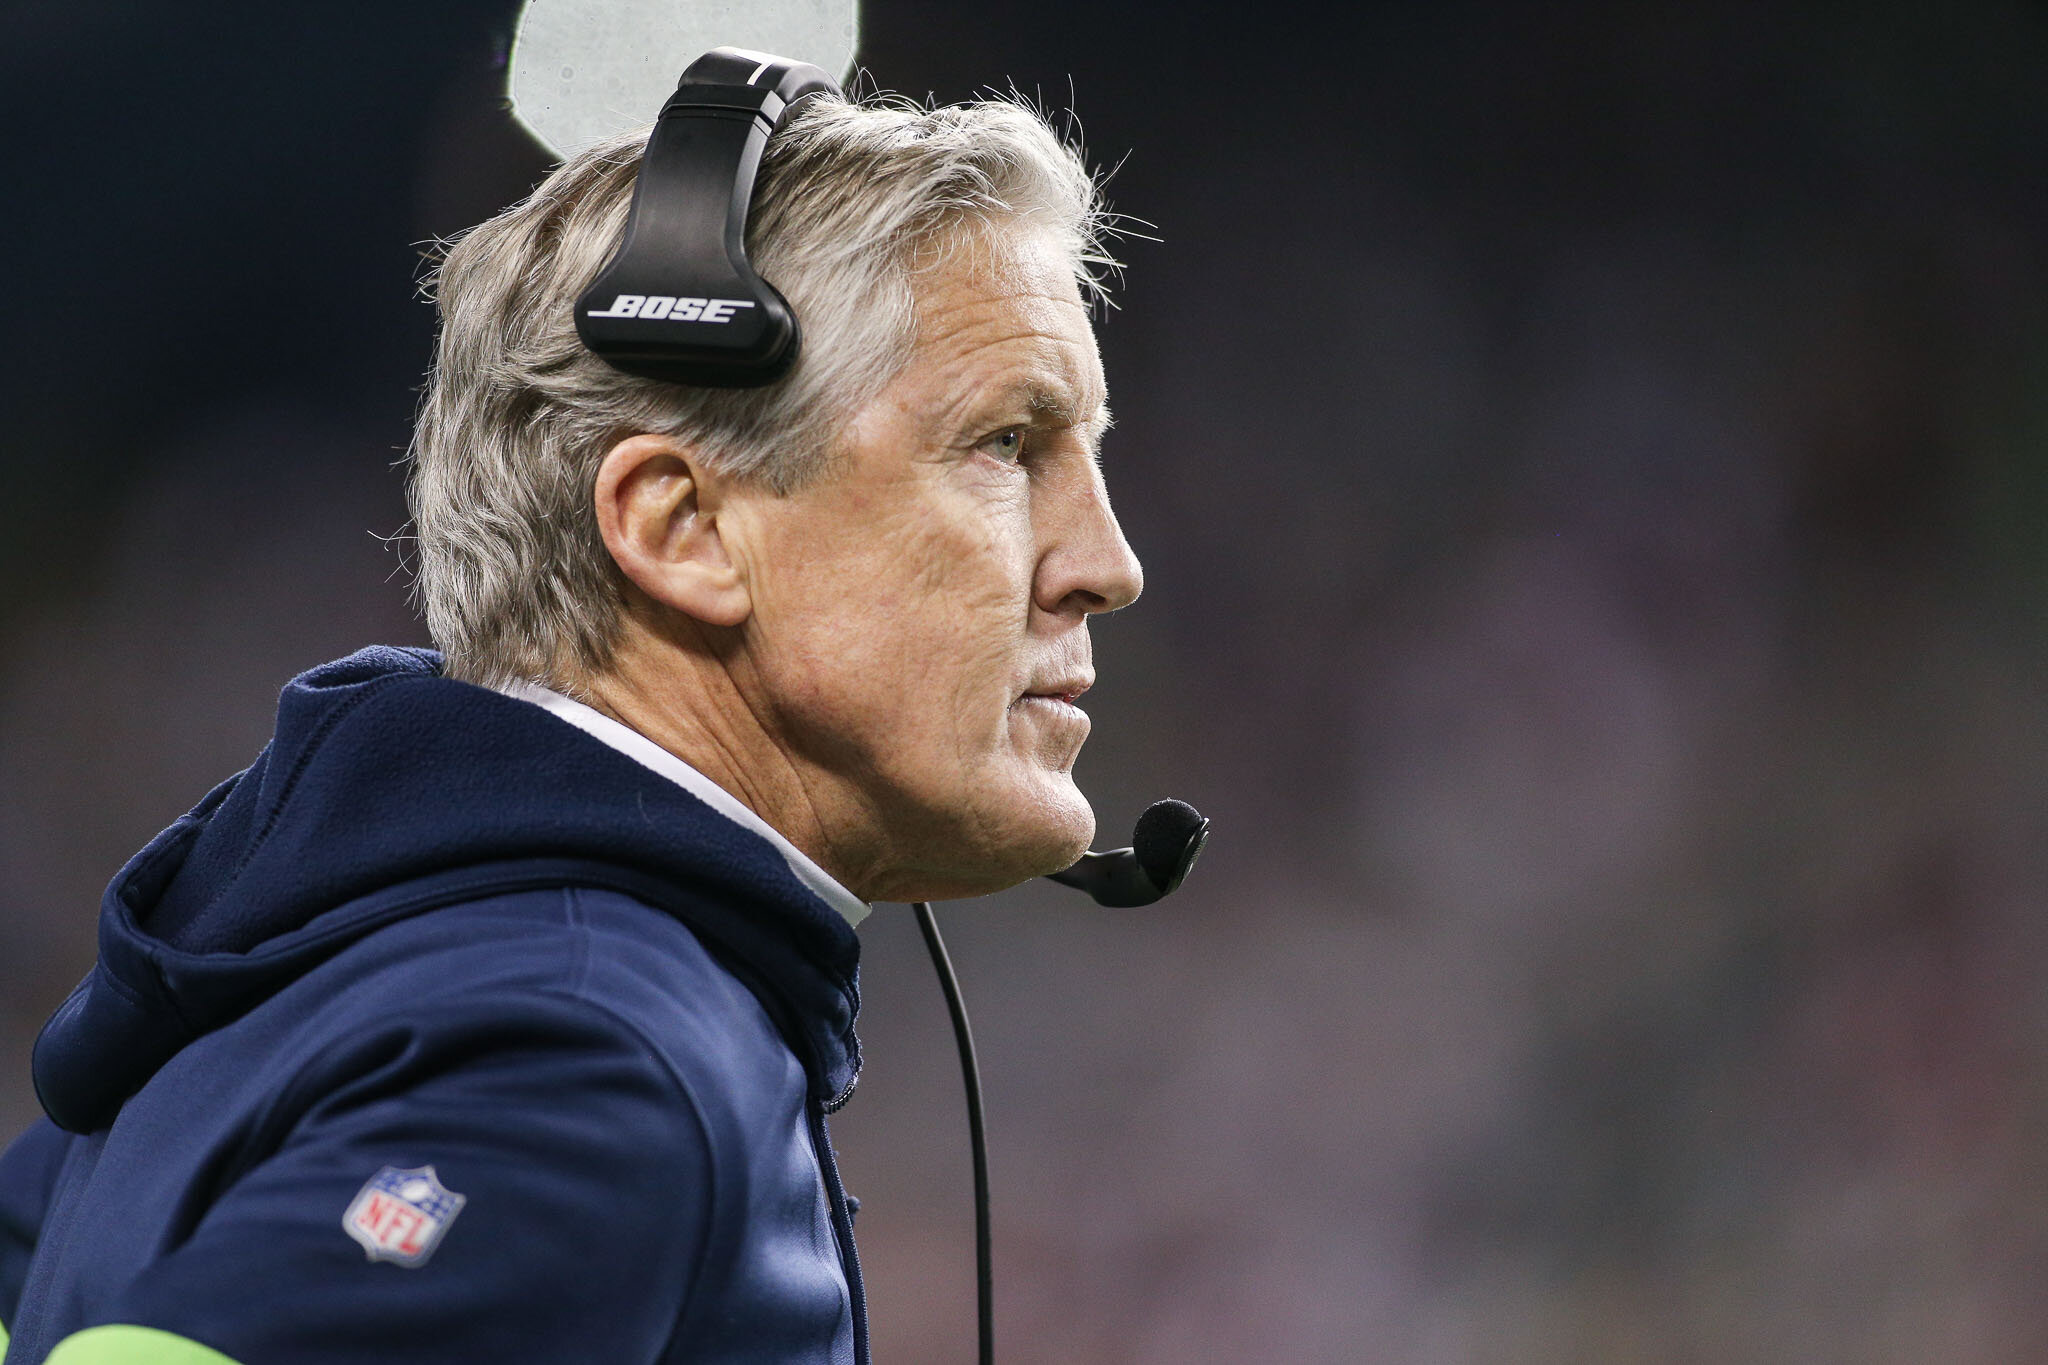  Seattle Seahawks head coach Pete Carroll on the sidelines during the first quarter of an NFL football game against the San Francisco 49ers, Sunday, December 29, 2019, in Seattle. The 49ers defeat the Seahawks 26-21. (Matt Ferris/Image of Sport) 